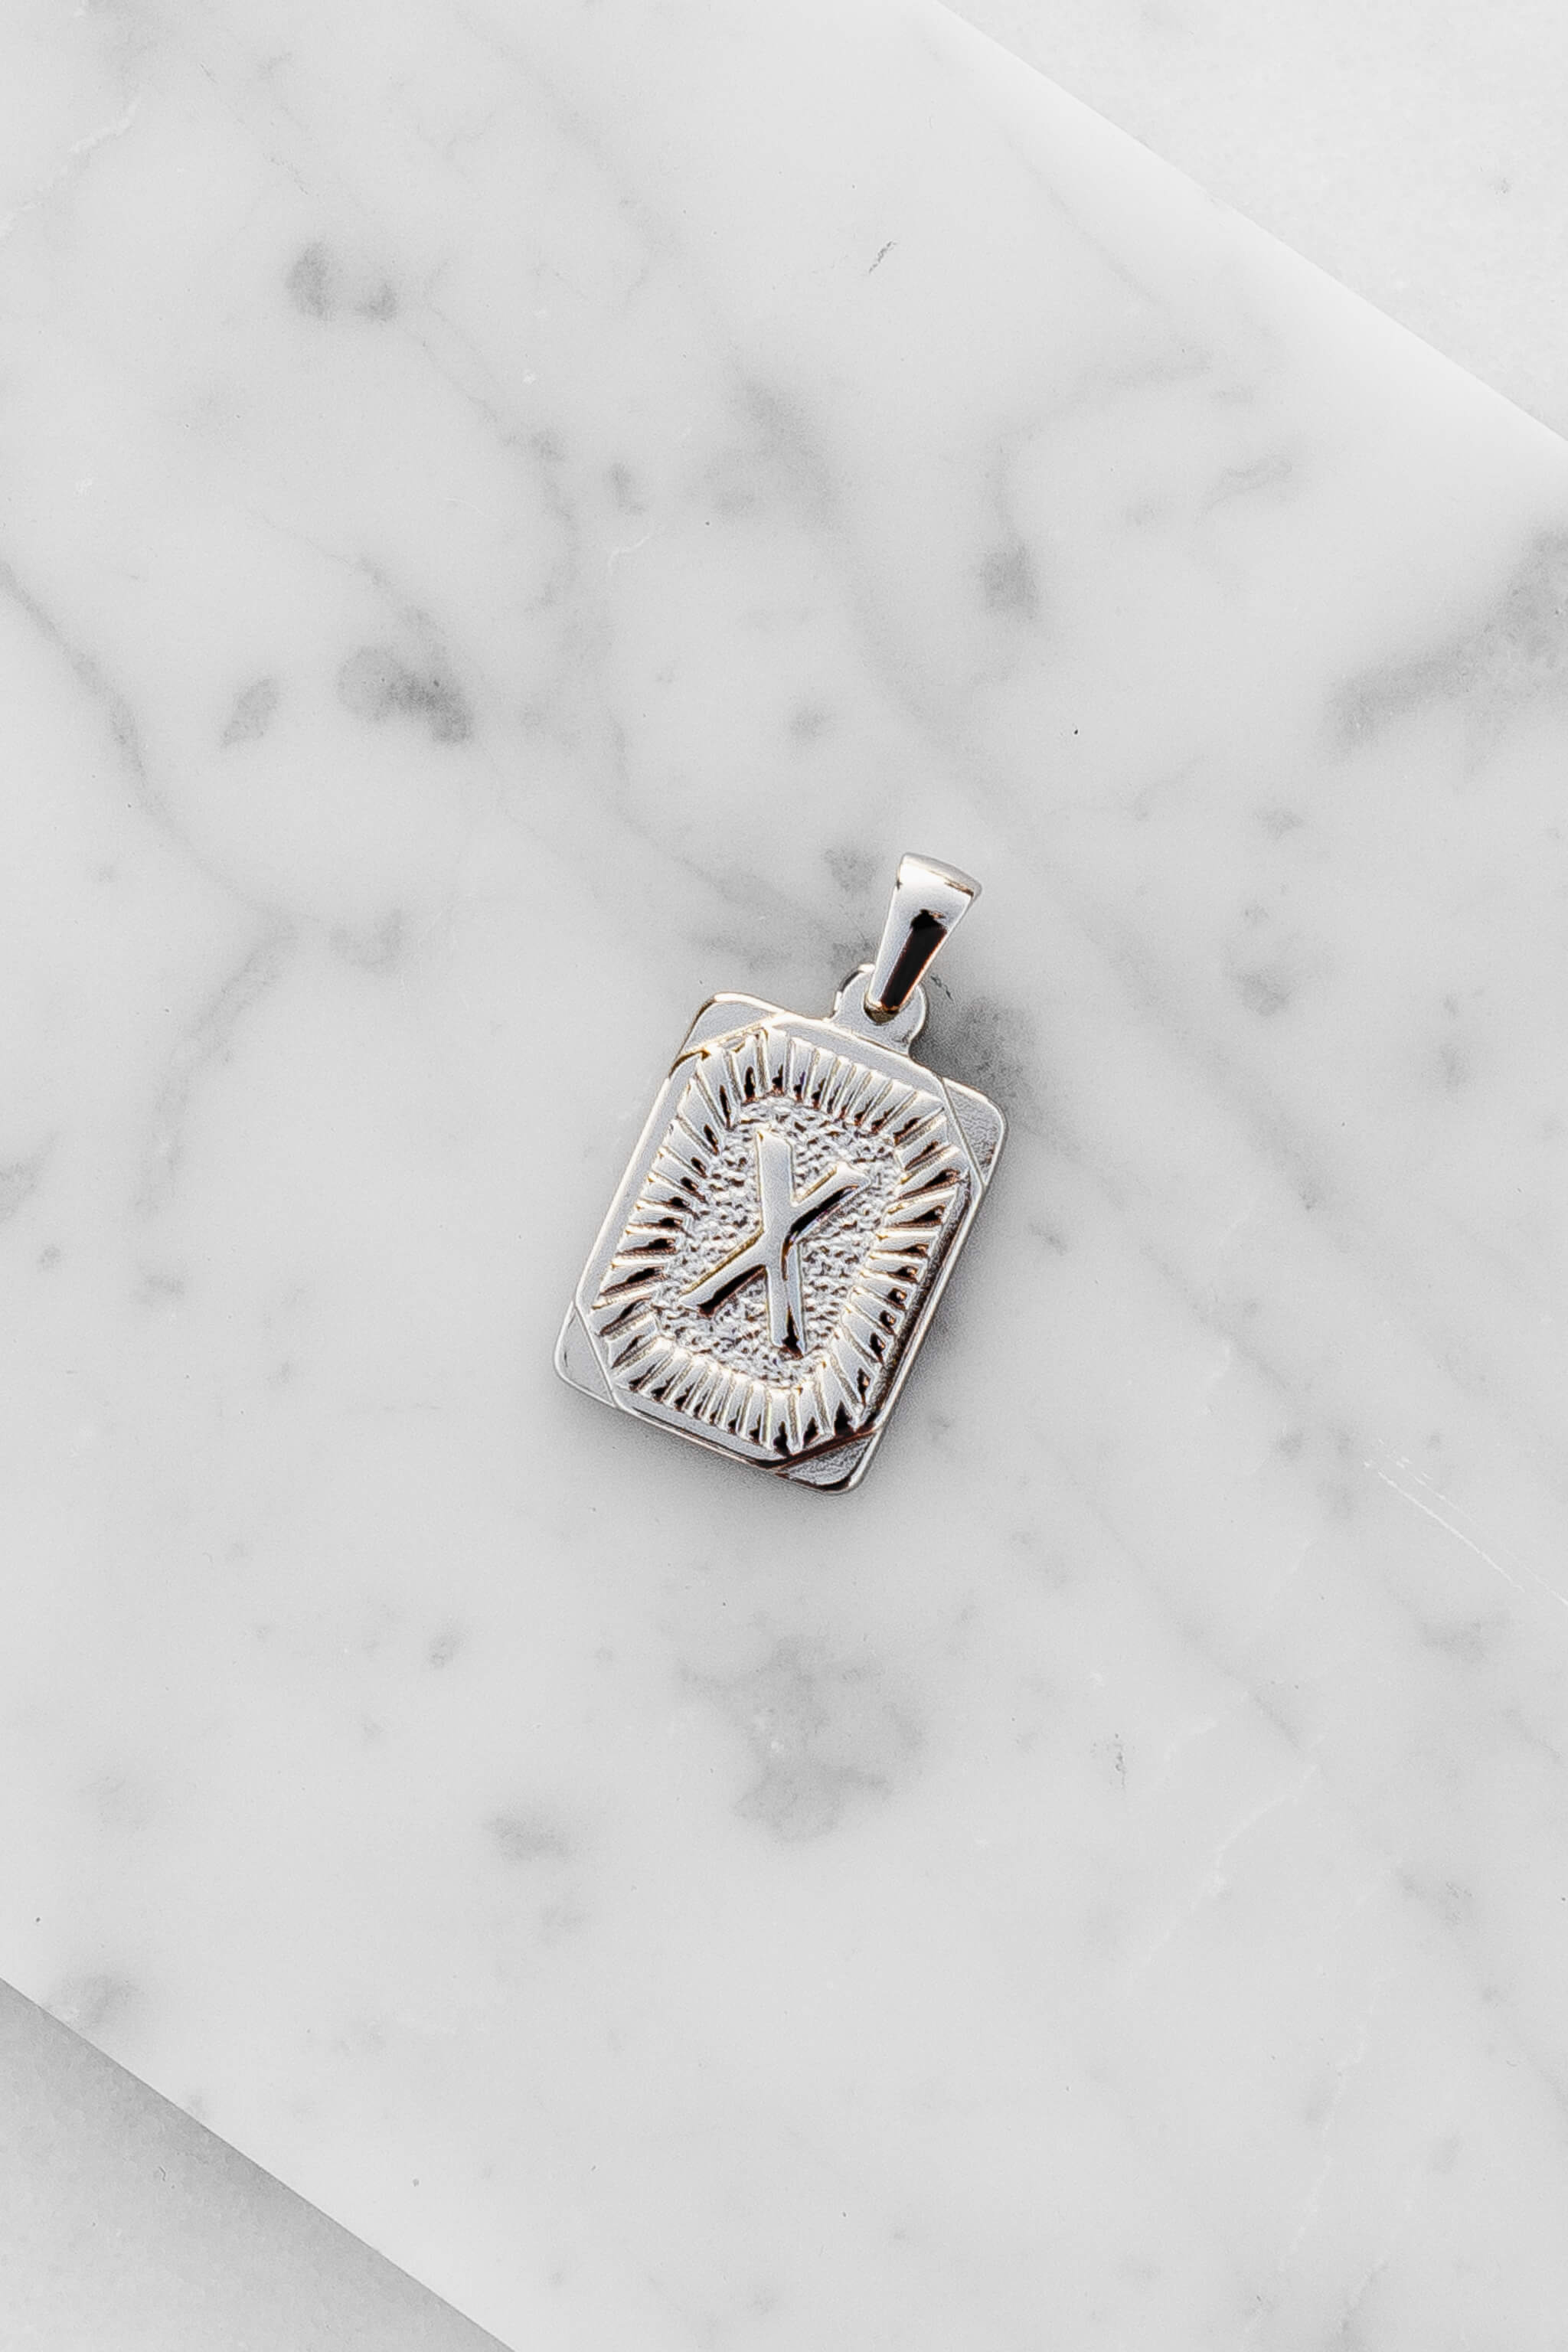 Silver Monogram Letter "X" Charm laying on a marble